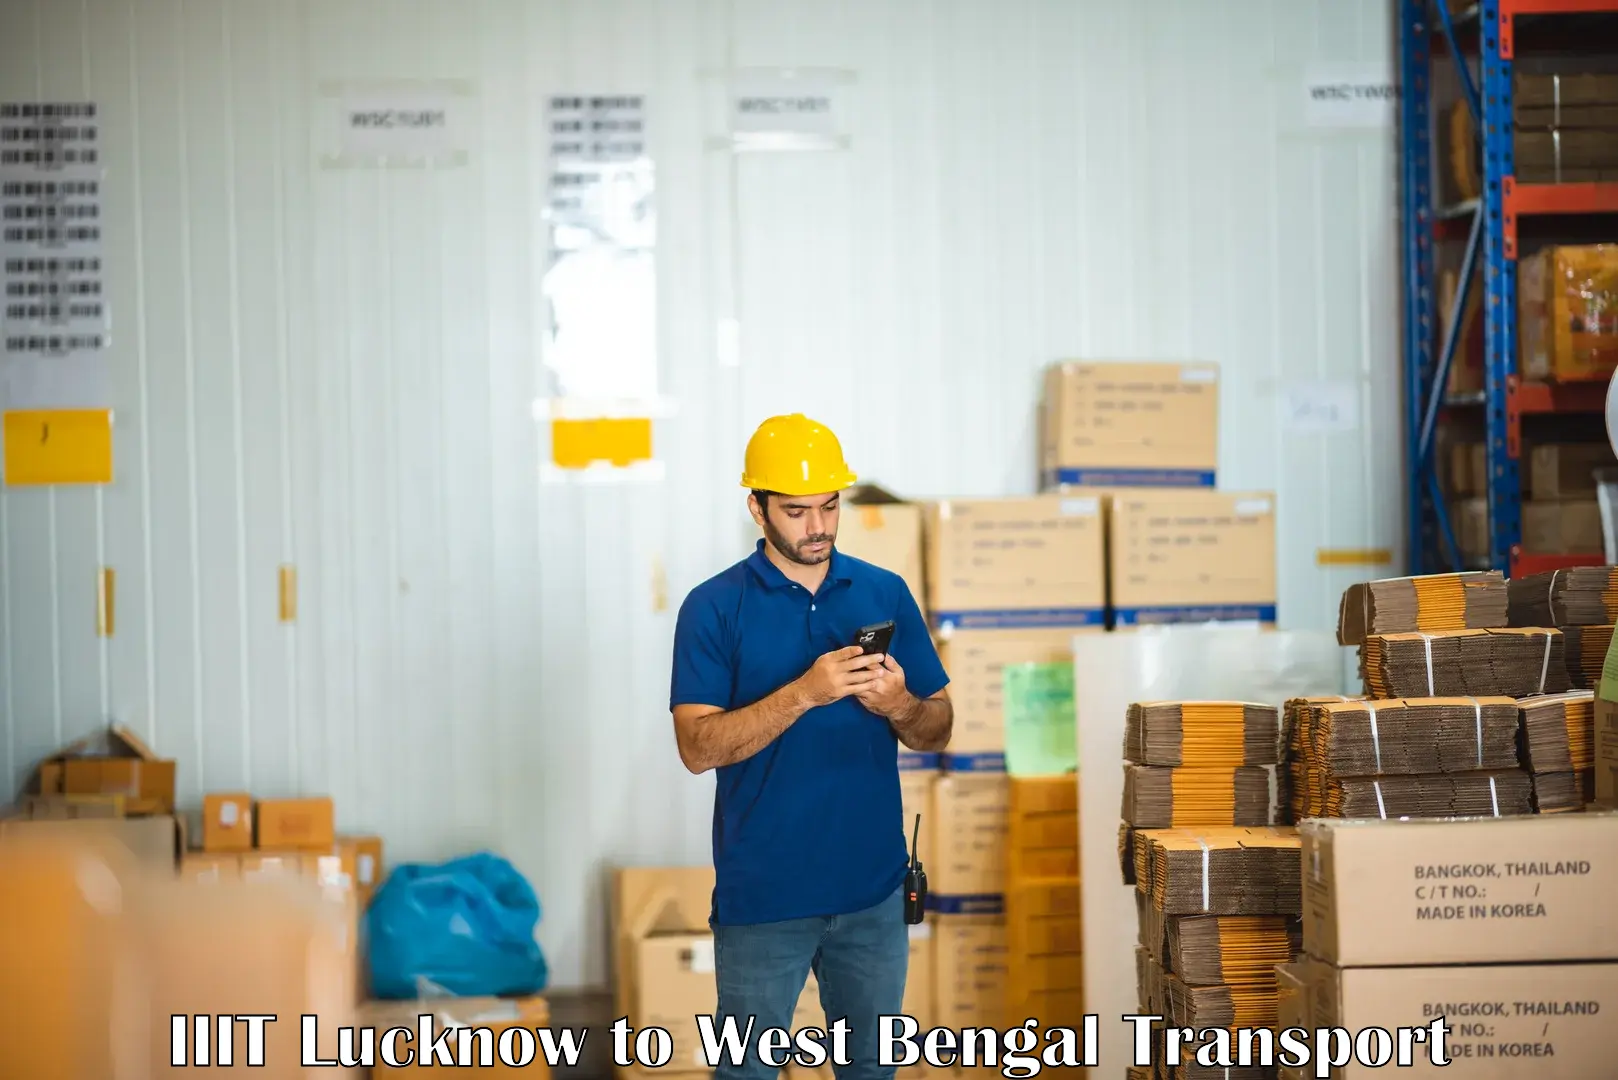 Delivery service IIIT Lucknow to West Bengal